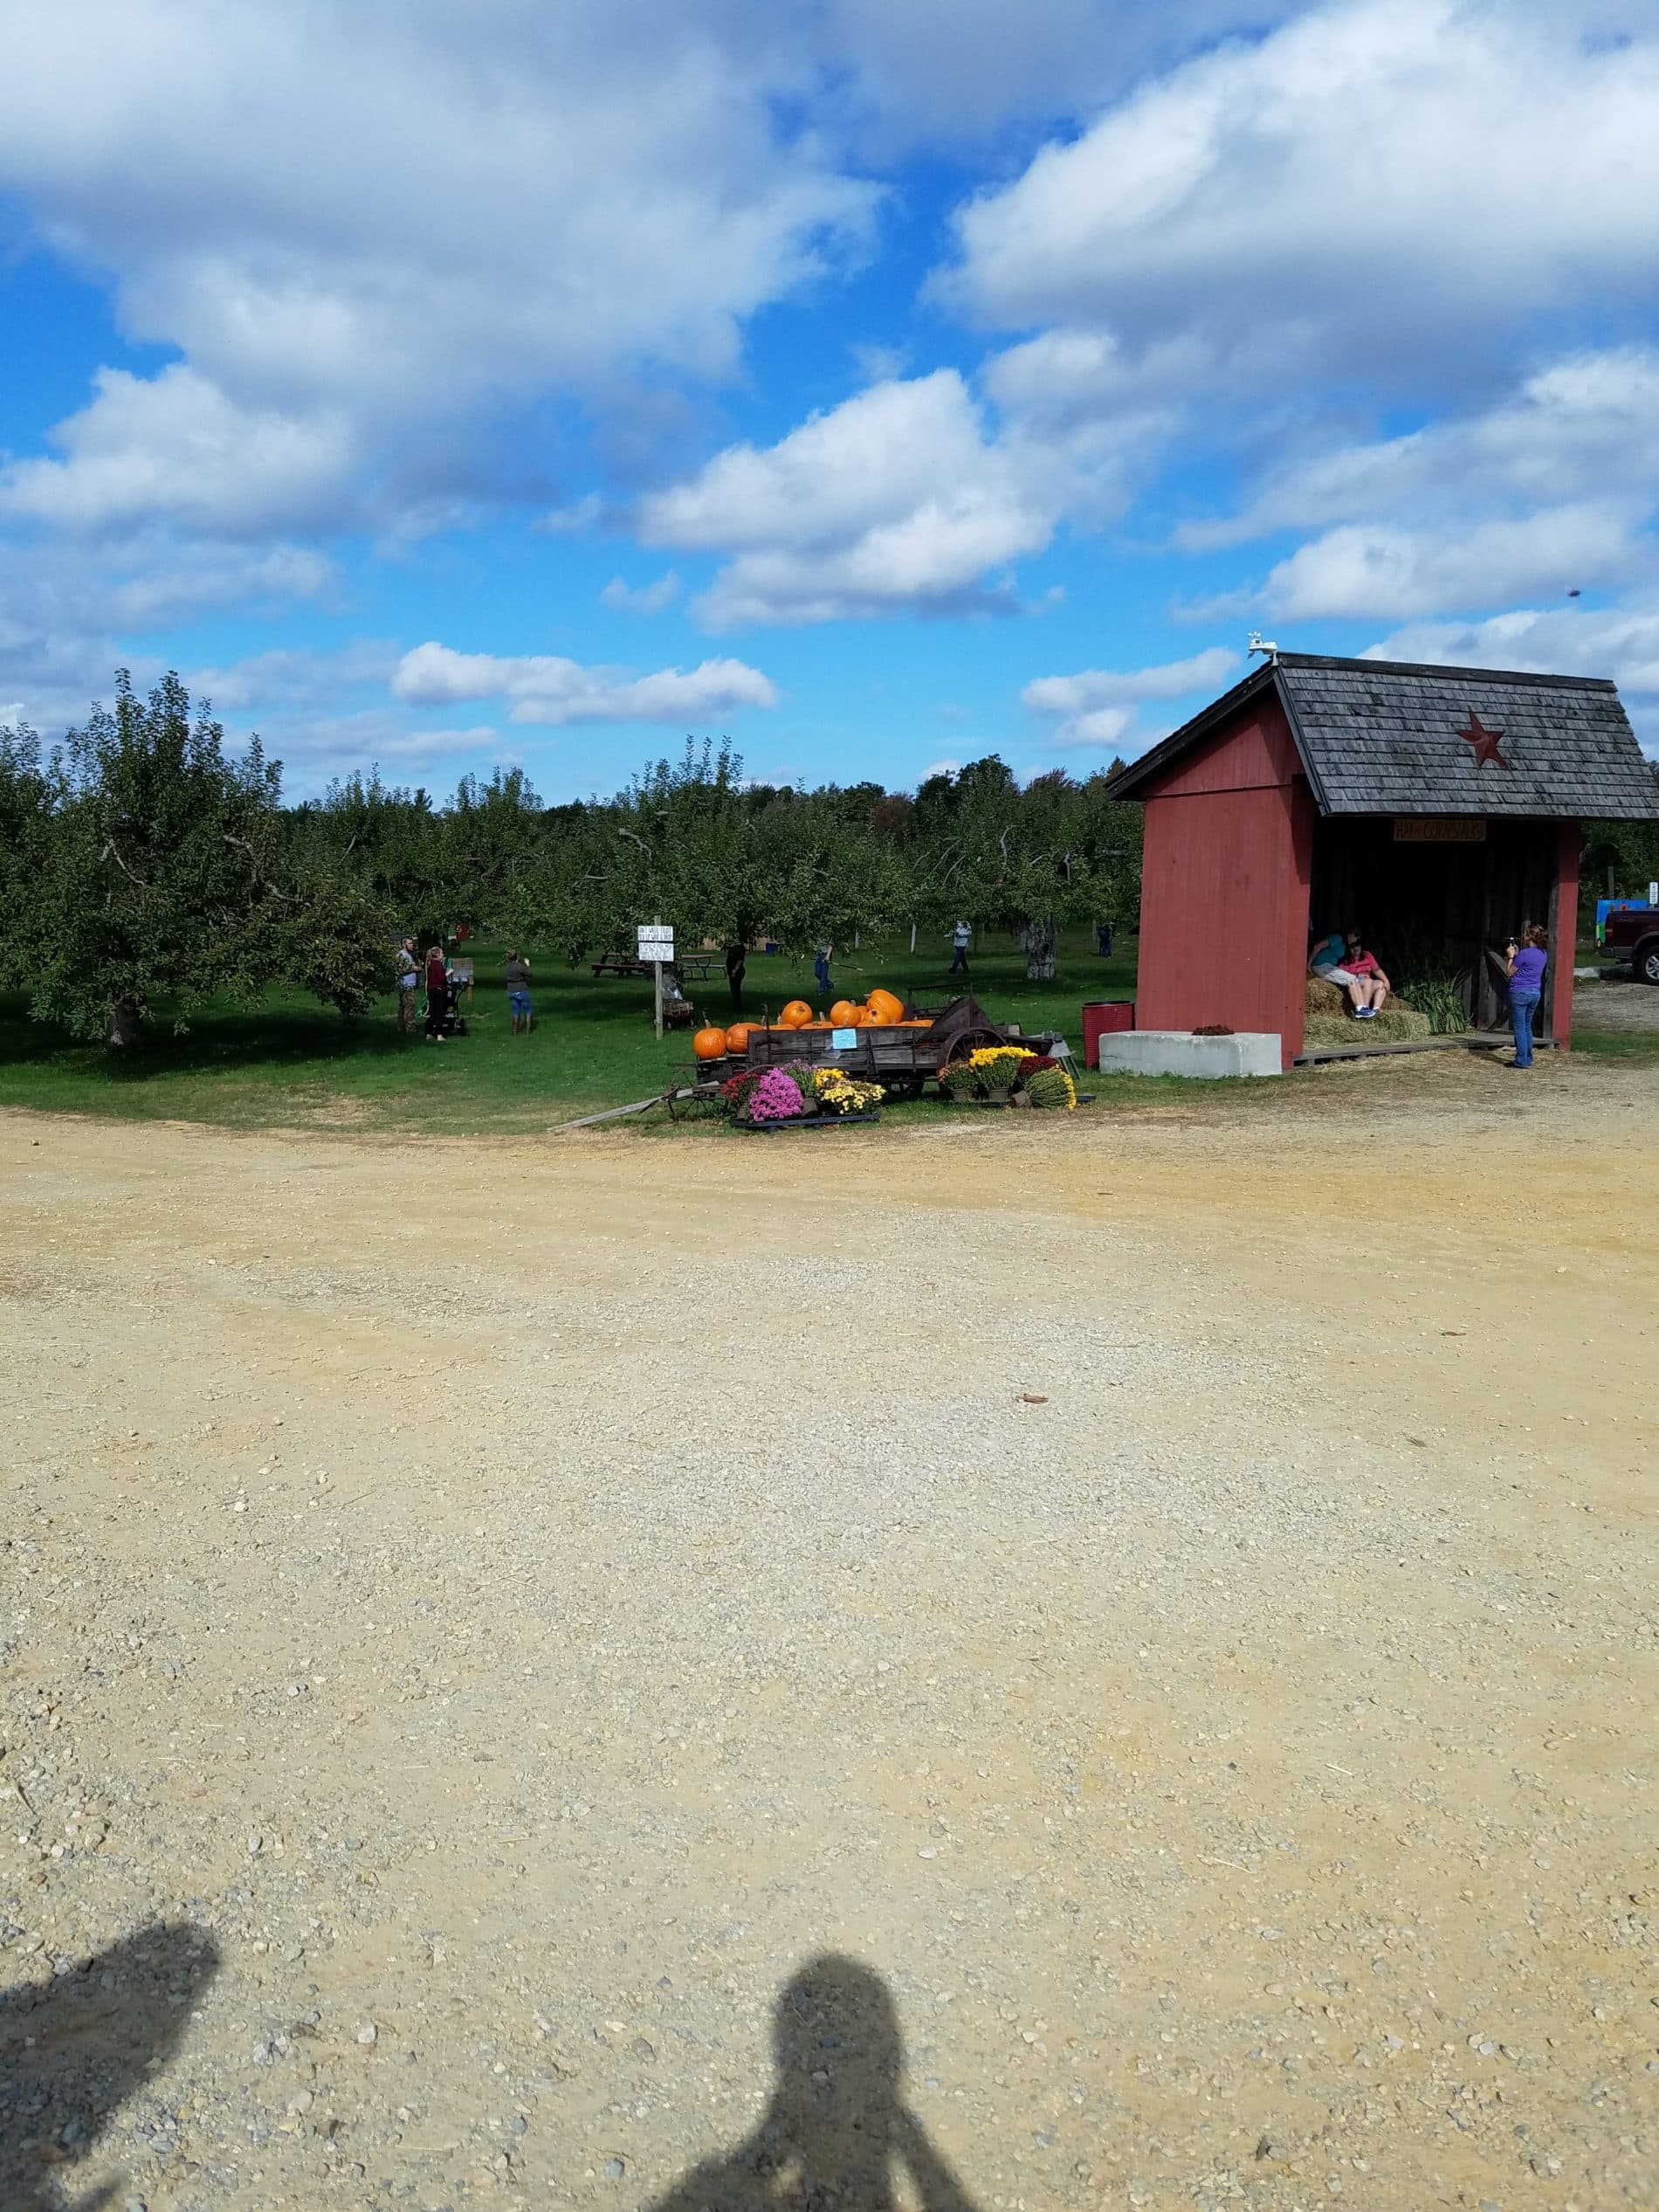 A red overhang provides hay bales for people to sit on and pose for pictures, while a small cart has several pumpkins to pick from